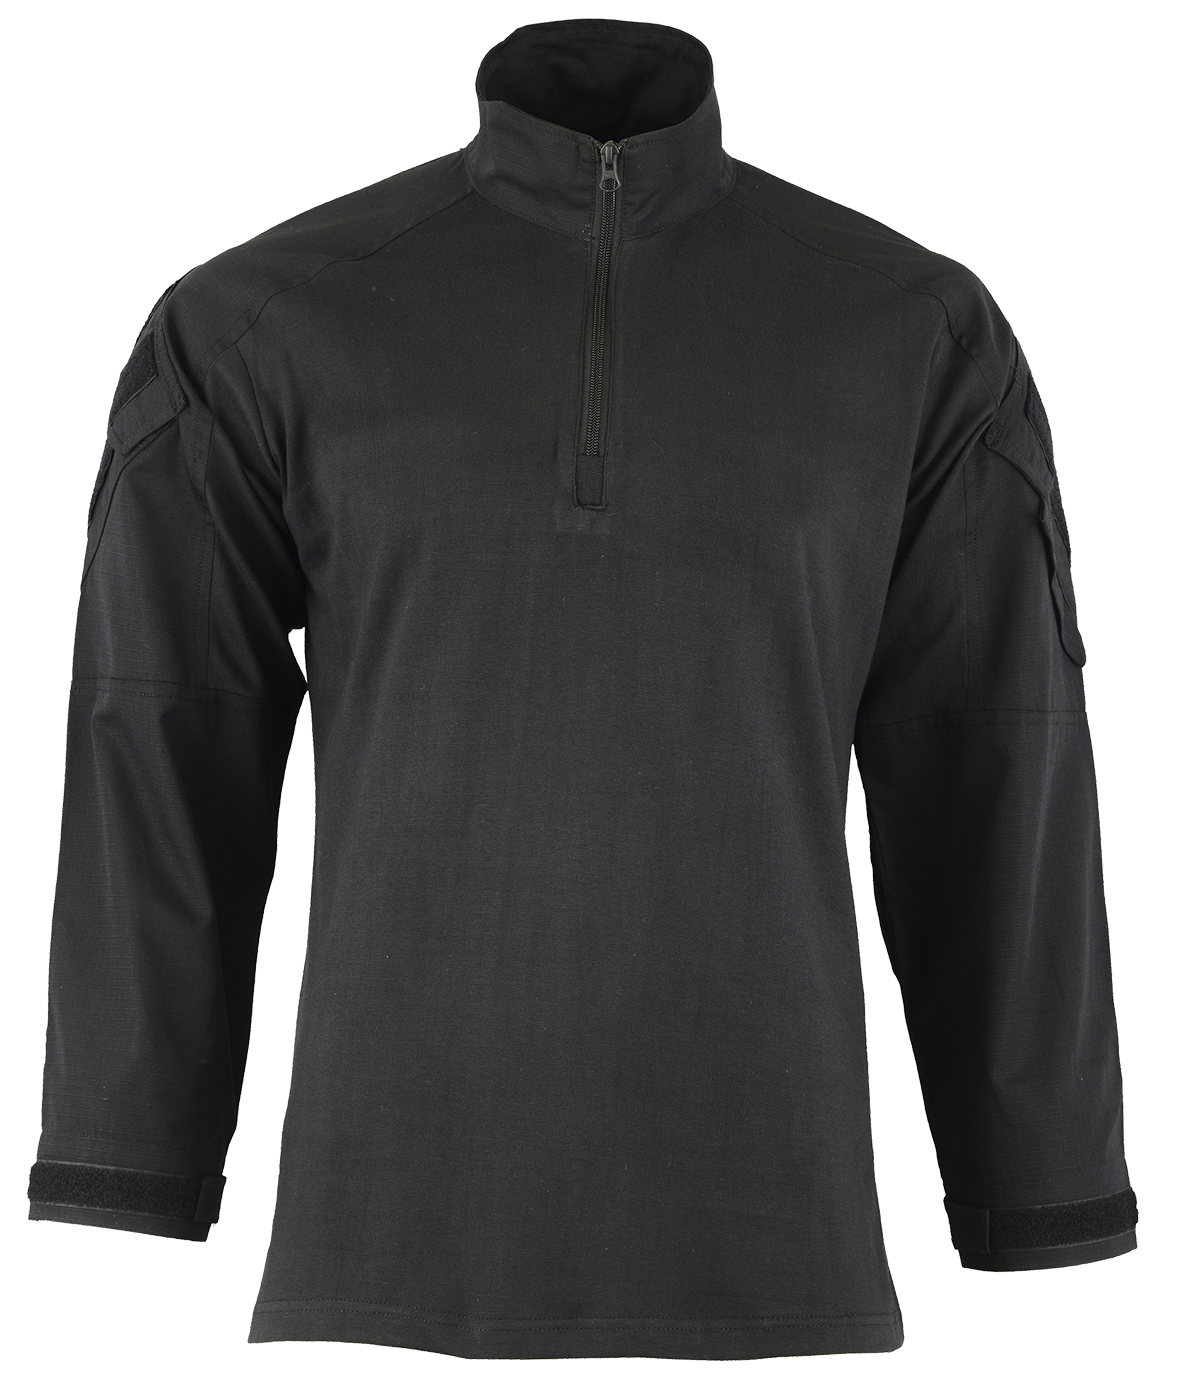 Tactical Zone HYBRID TACTICAL SHIRT IS A PERFECT COMBAT SHIRT Colour black  front